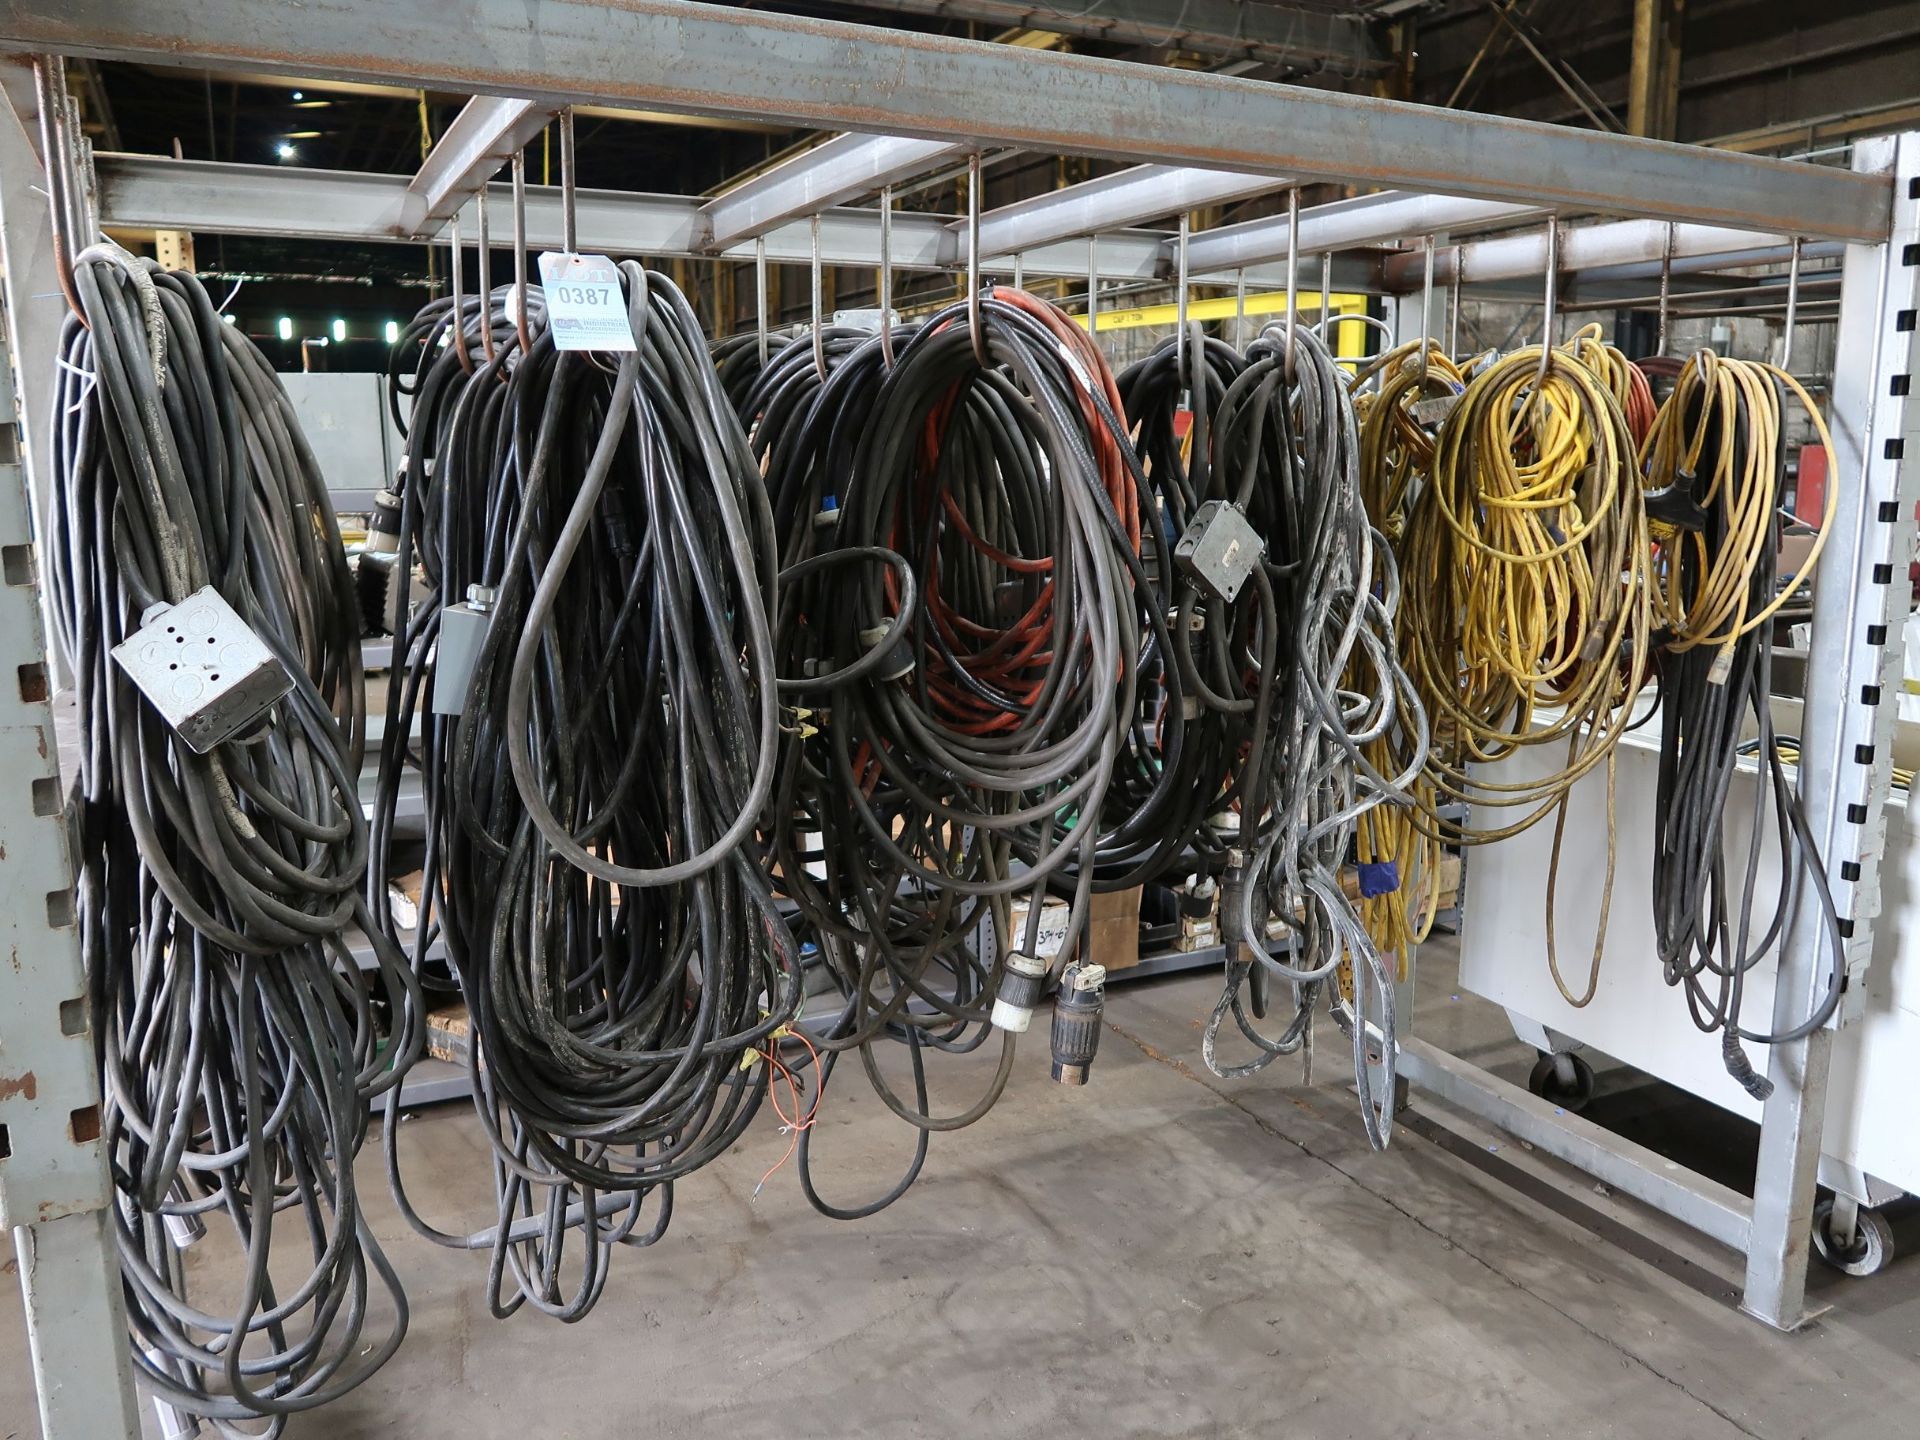 (LOT) MISCELLANEOUS HEAVY DUTY ELECTRICAL CORDS HANGING UNDER RACK **NO RACK**